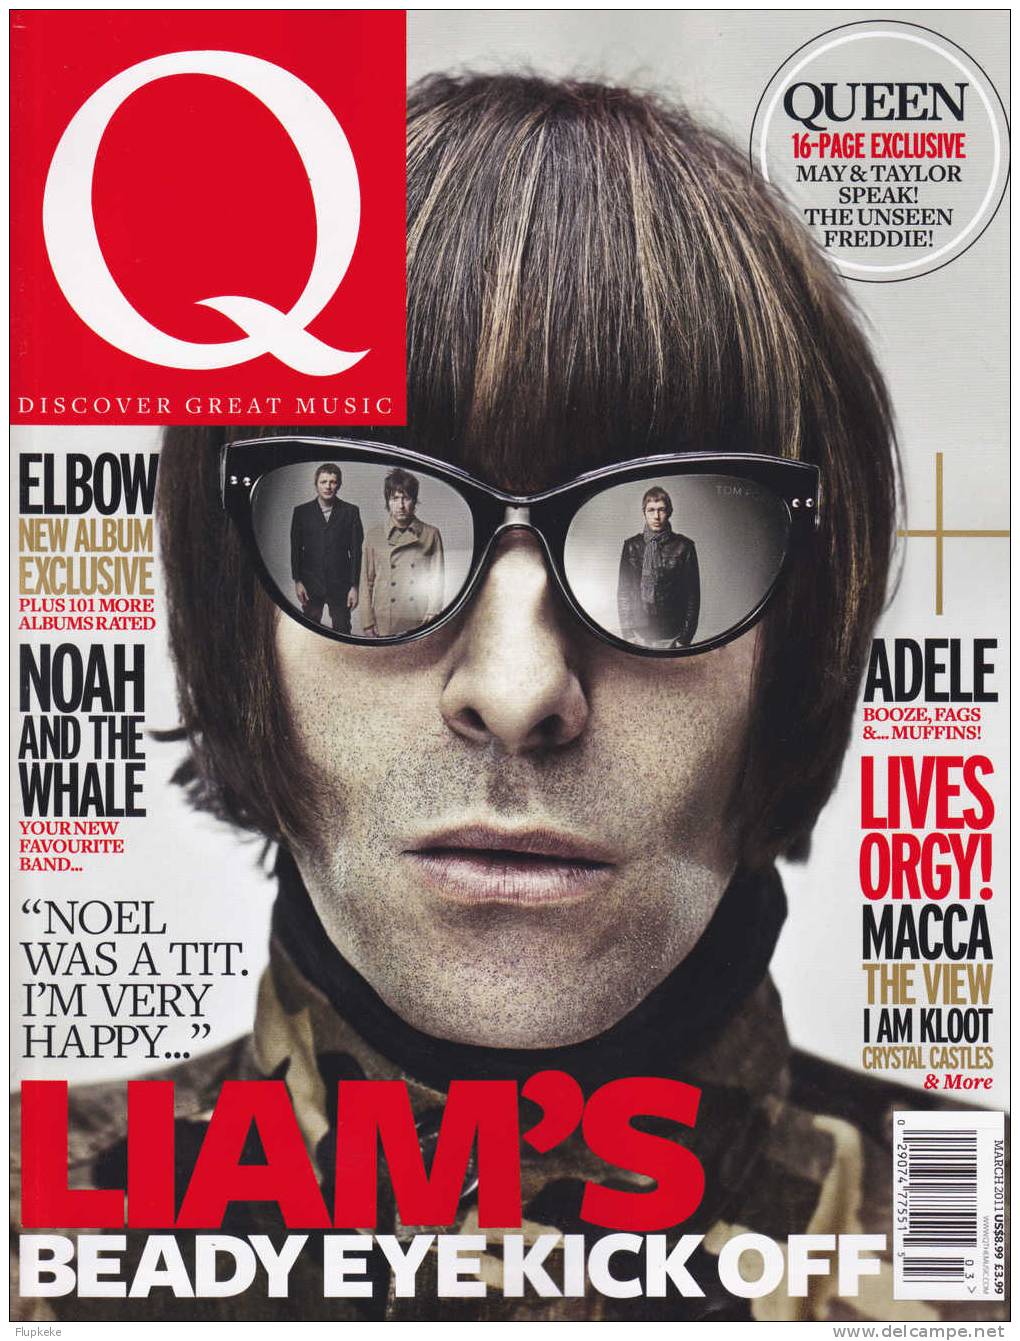 Q 296 March 2011 Liam´s Beady Eye Kick Off Queen 16 Page Exclusive - Entretenimiento